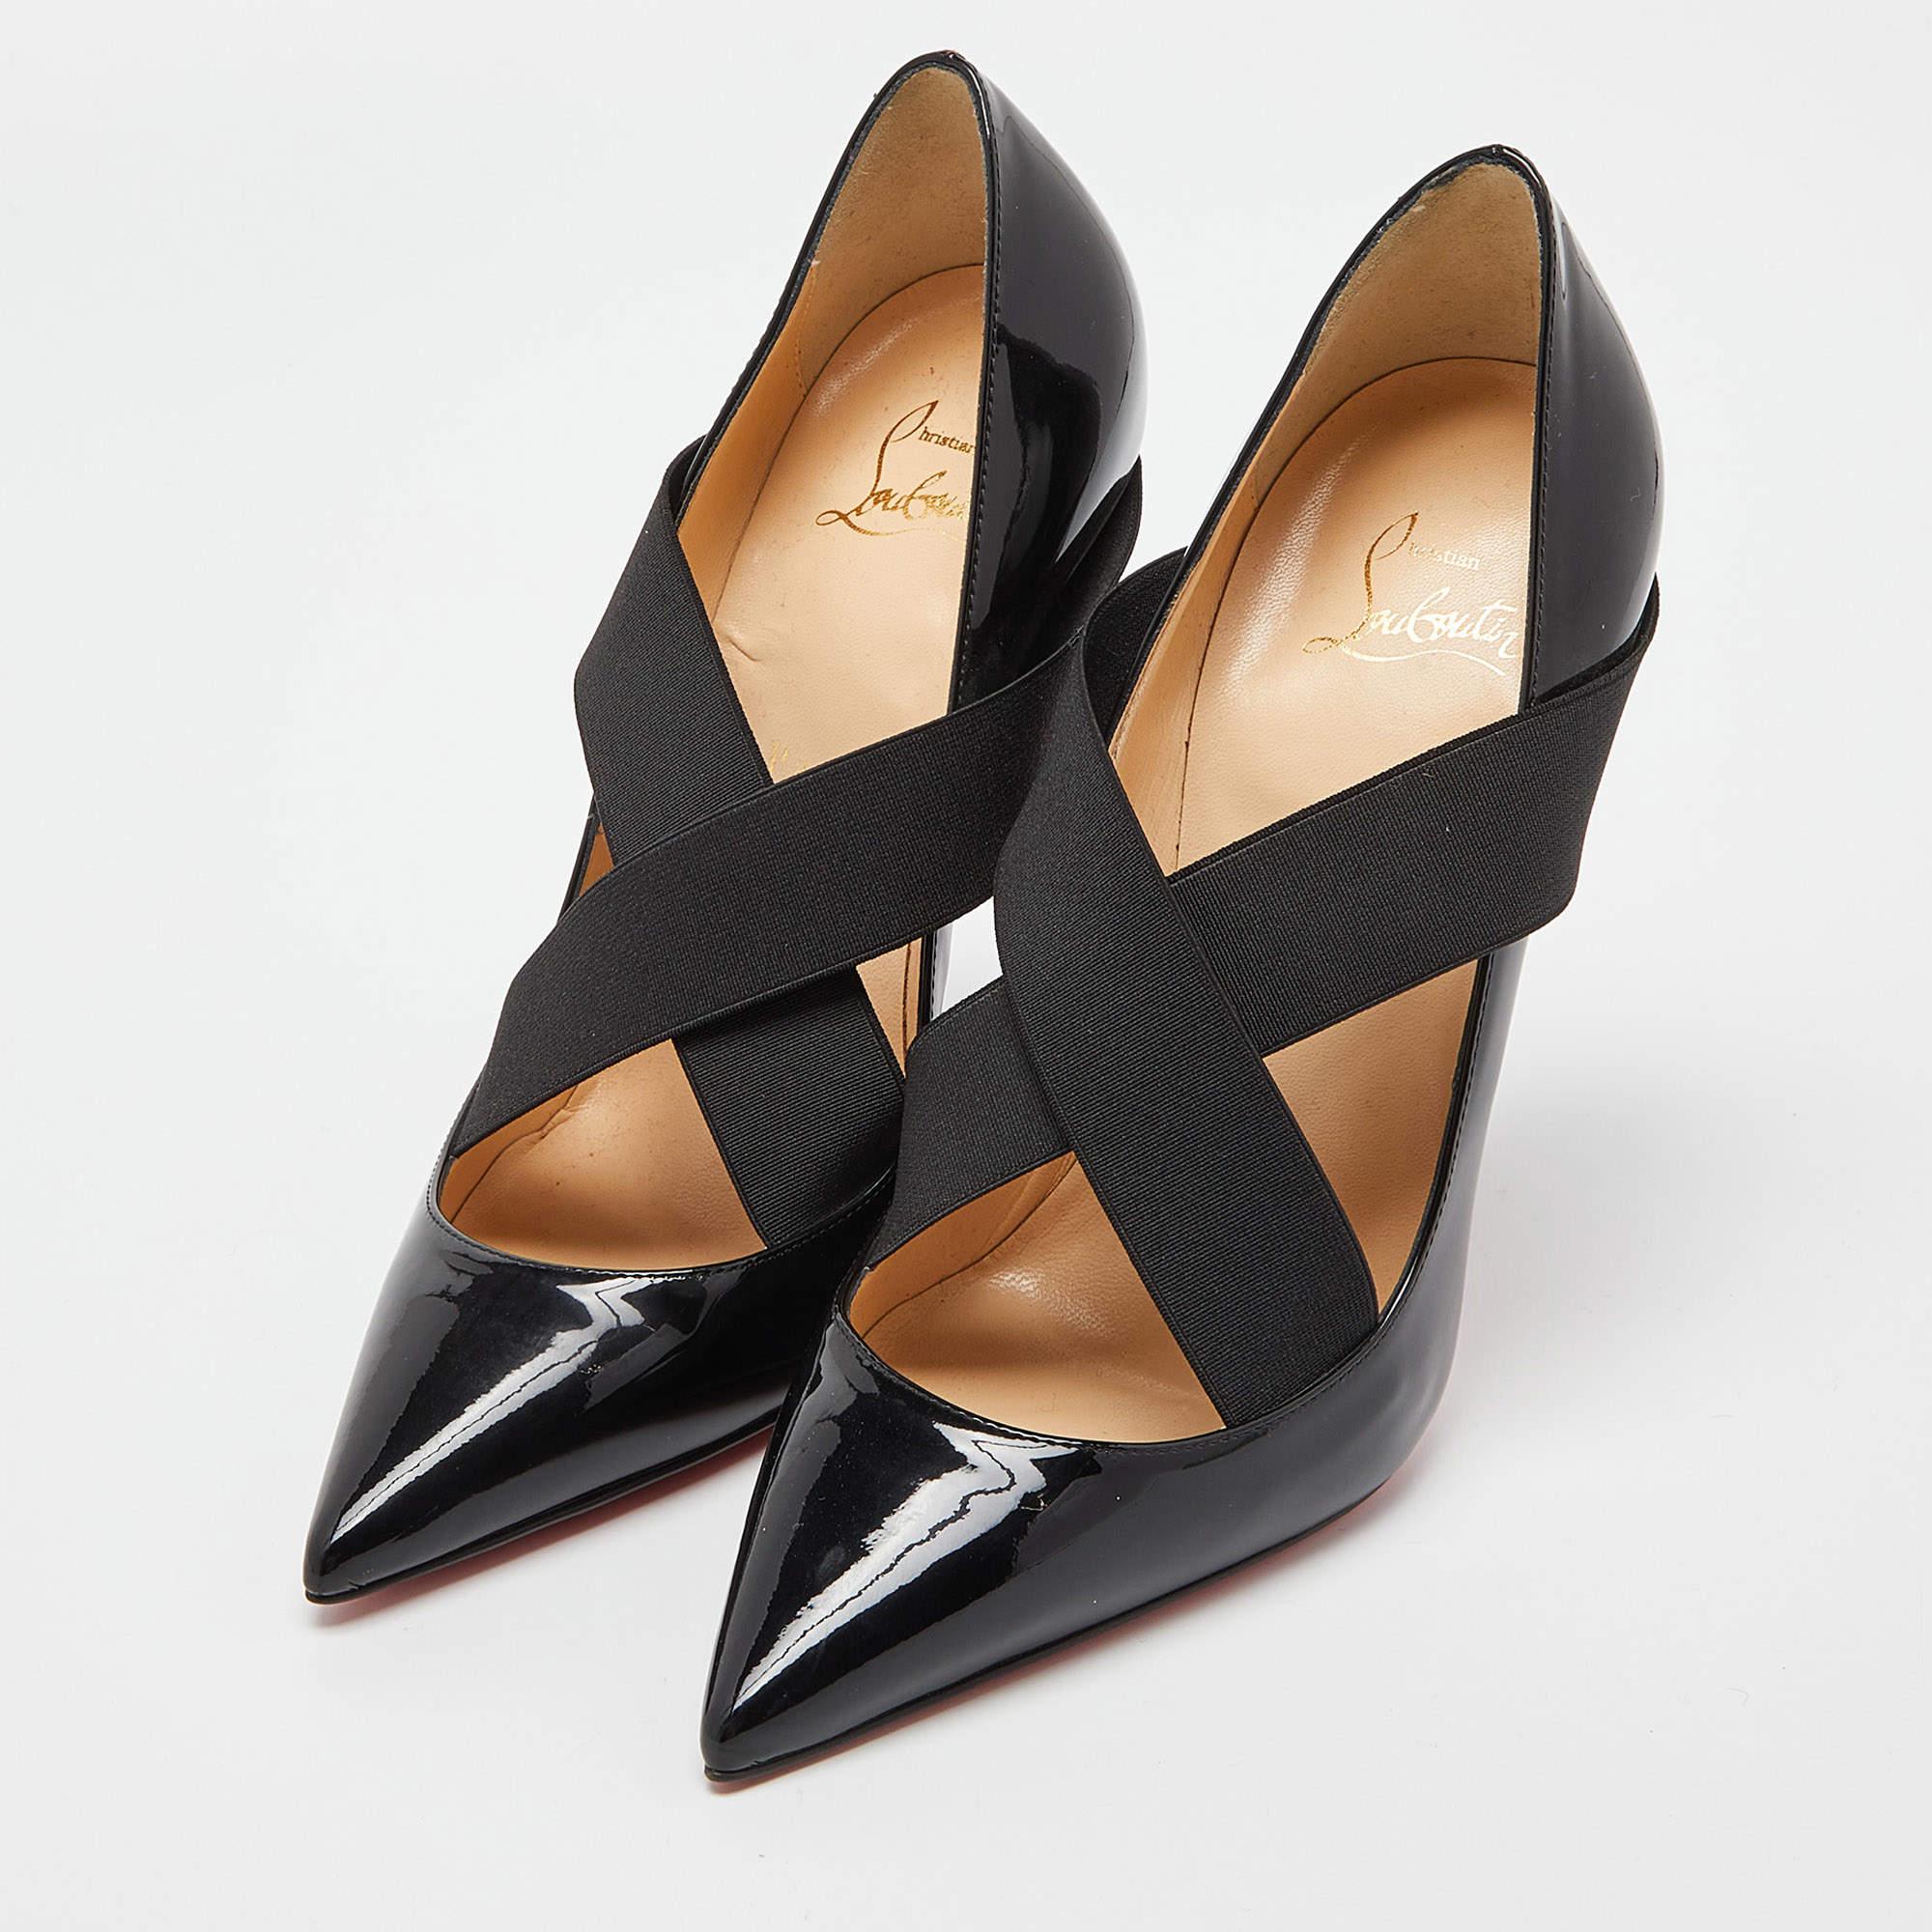 To give you an extraordinary experience, Christian Louboutin brings you this pair of Sharpstagram pumps that will elongate your feet and give you confidence in every step. They come with pointed toes and cross straps on the vamps. The pumps also